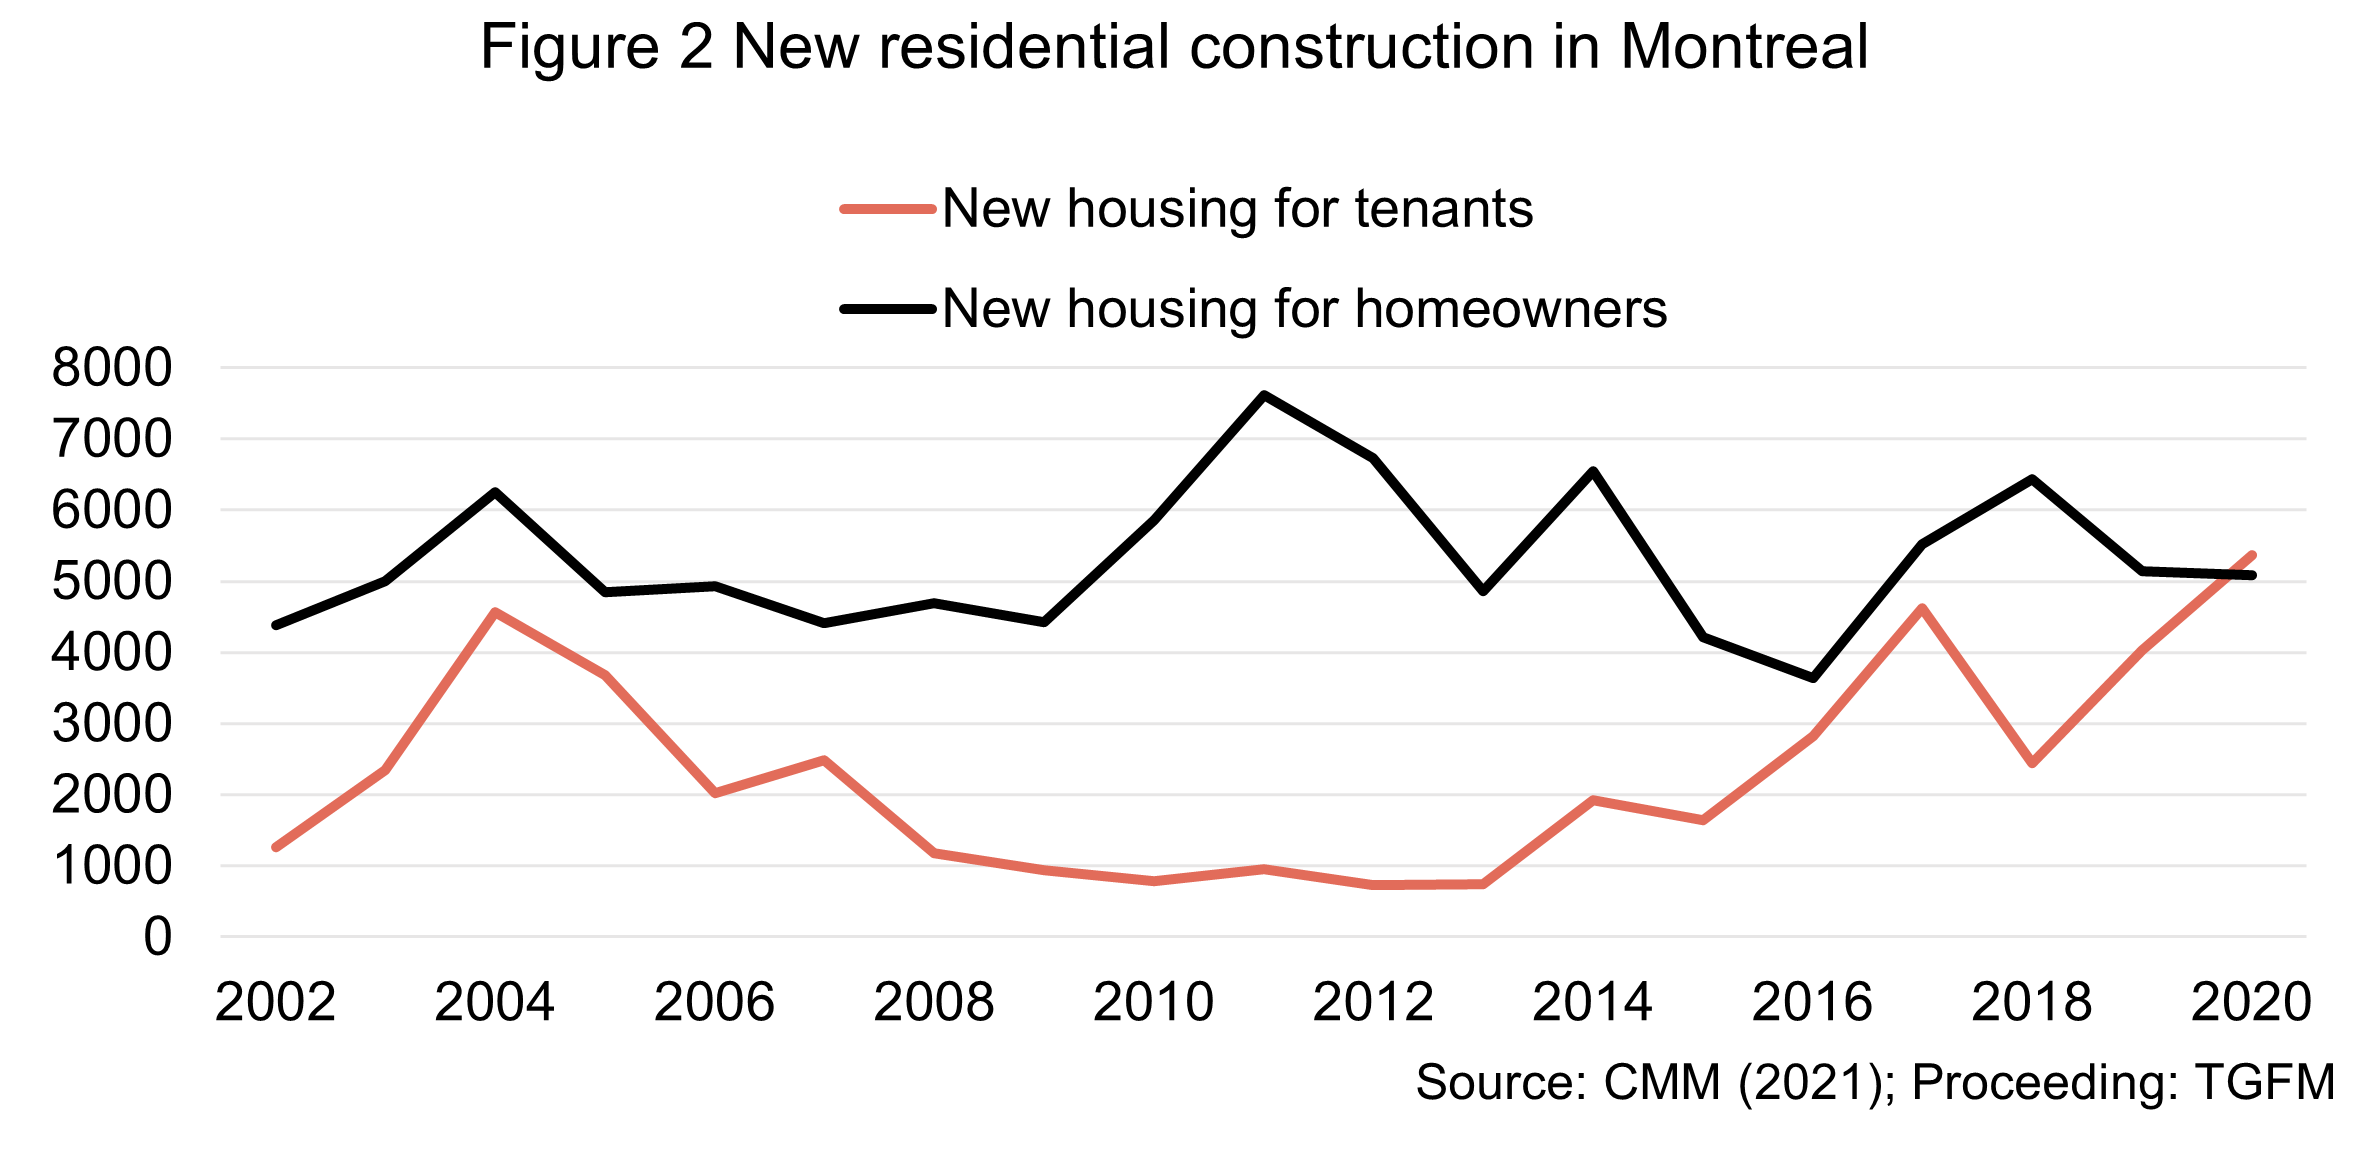 Graph showing the evolution of housing construction in Montreal from 2002 to 2020. In 2002, the majority of new housing units are for owners. This proportion increases around 2010. In 2020, the majority of new housing units are for renters. 